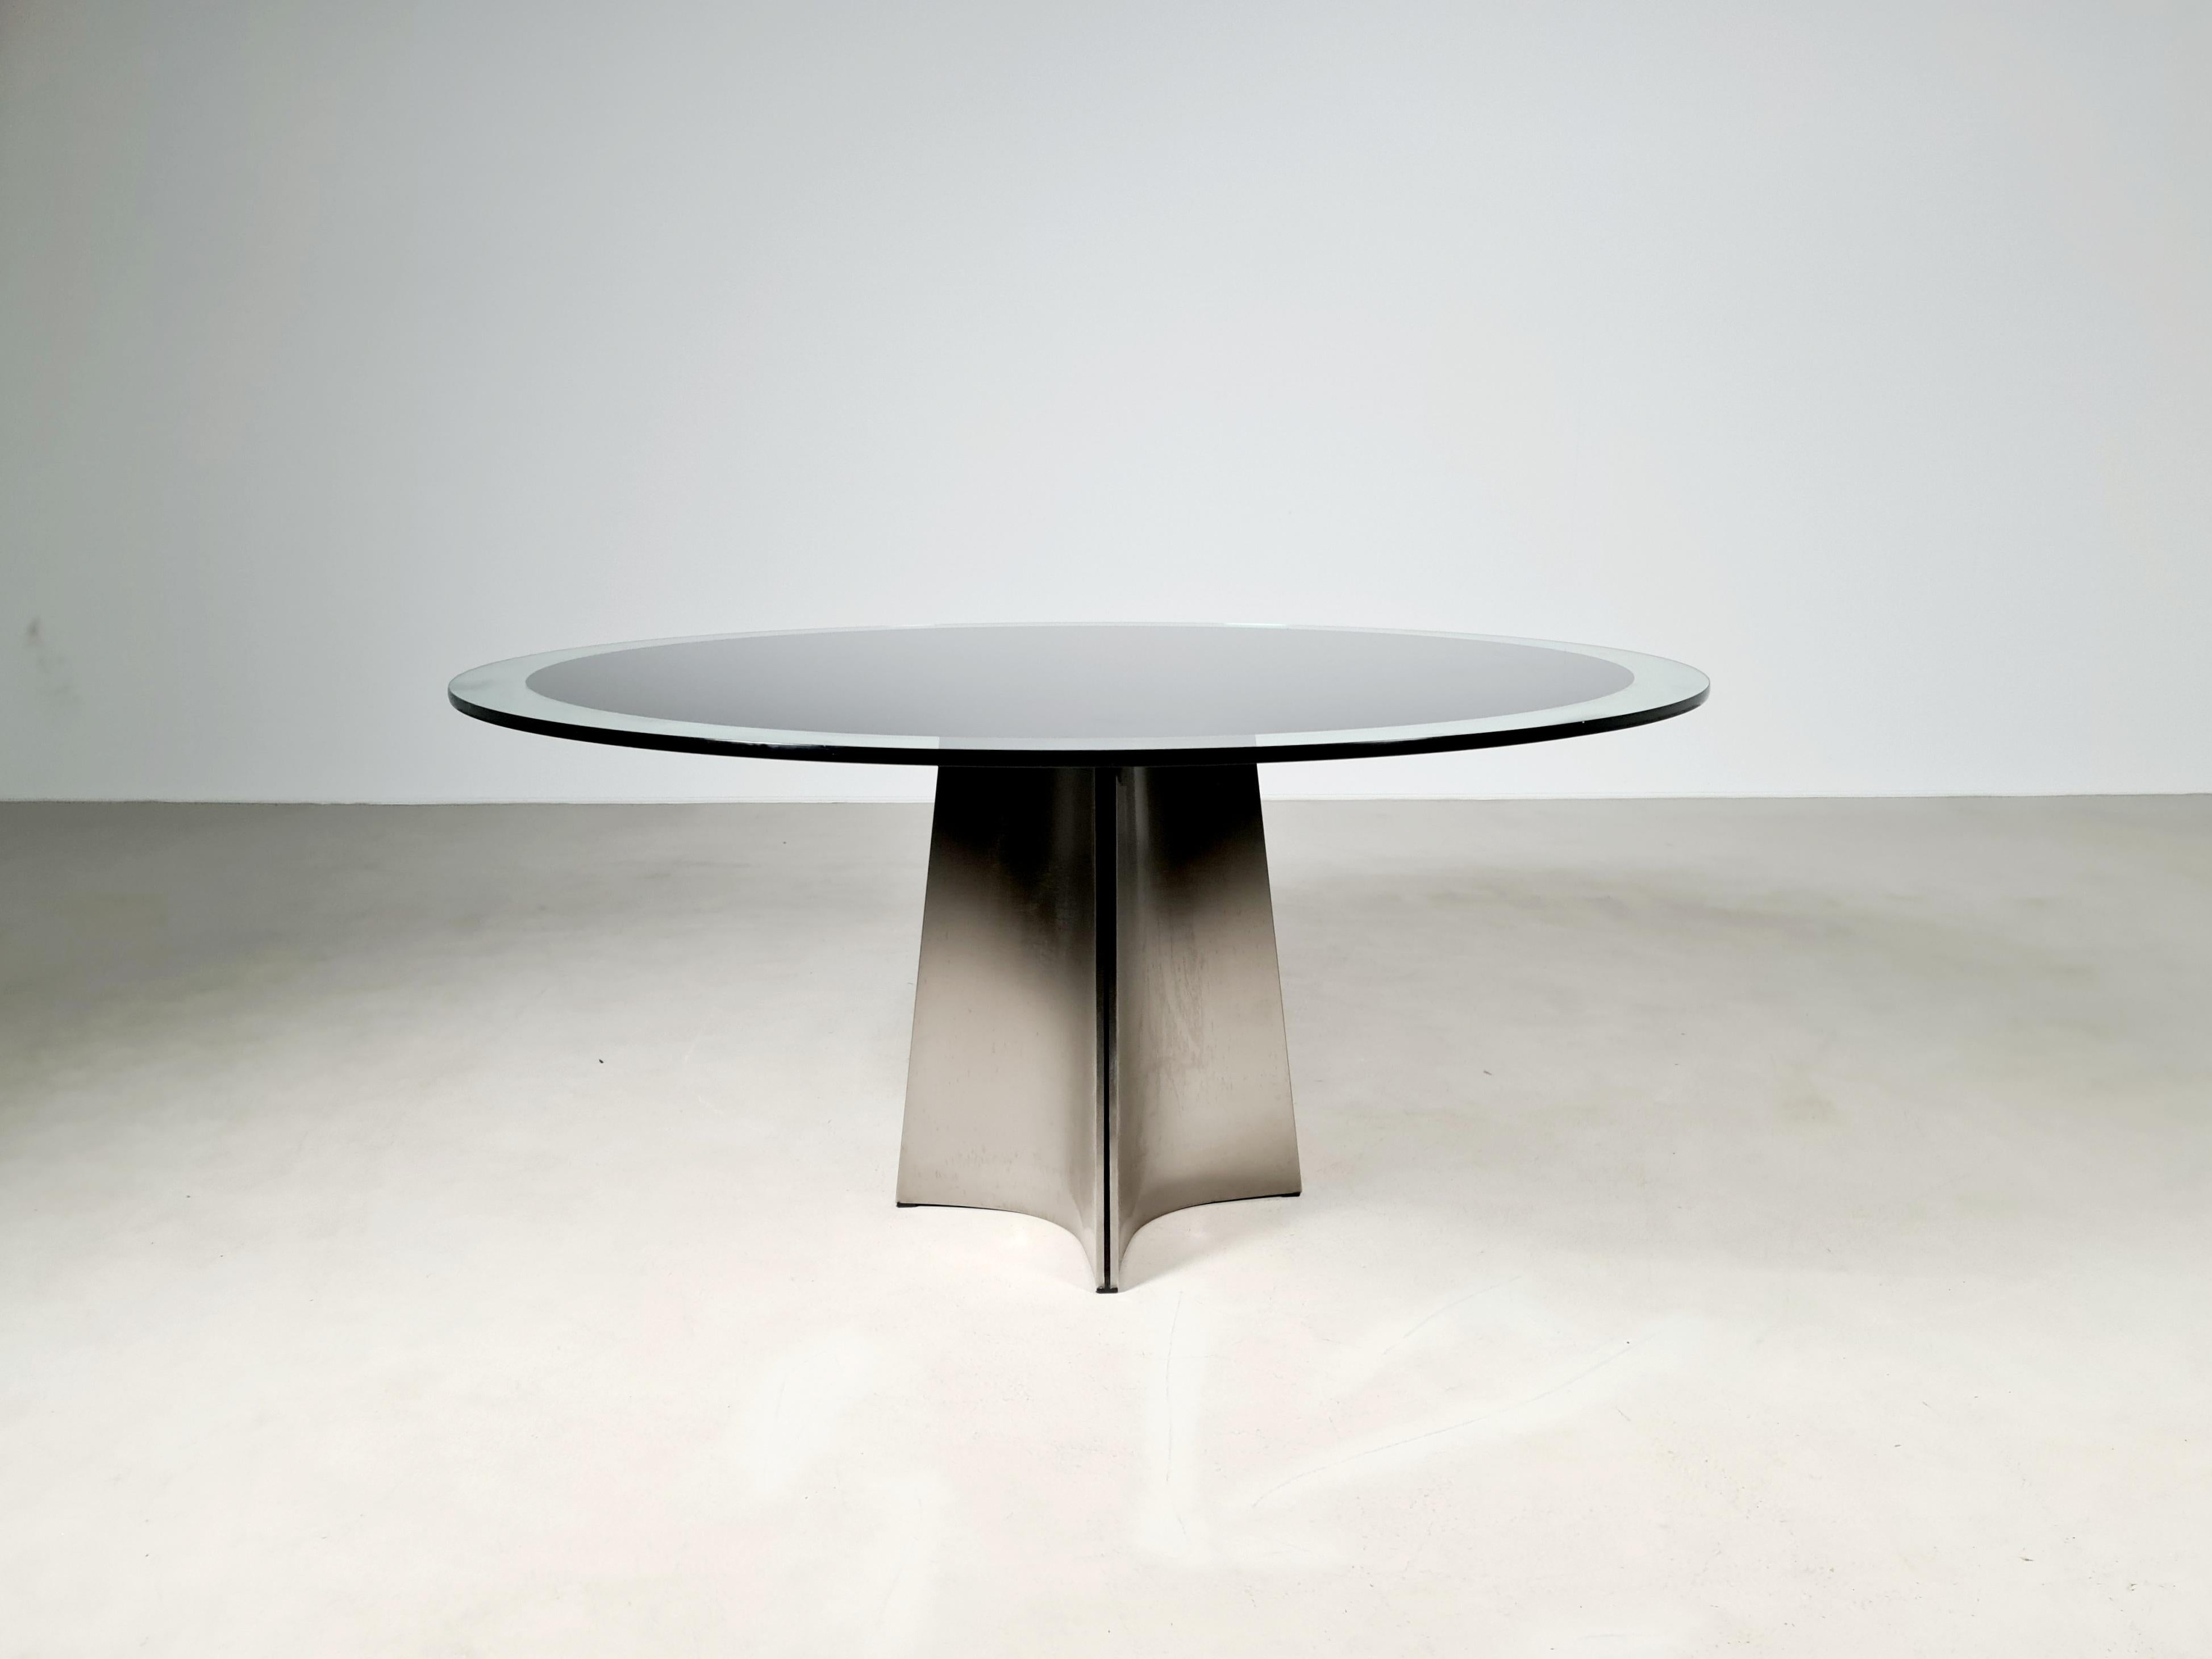 Spectacular so called 'ufo' dining table designed by Luigi Saccardo and manufactured by Arrmet, Italy 1972. The table has a stainless steel base that supports a glass top with black sticker bottom. The sticker is often very damaged and scratched